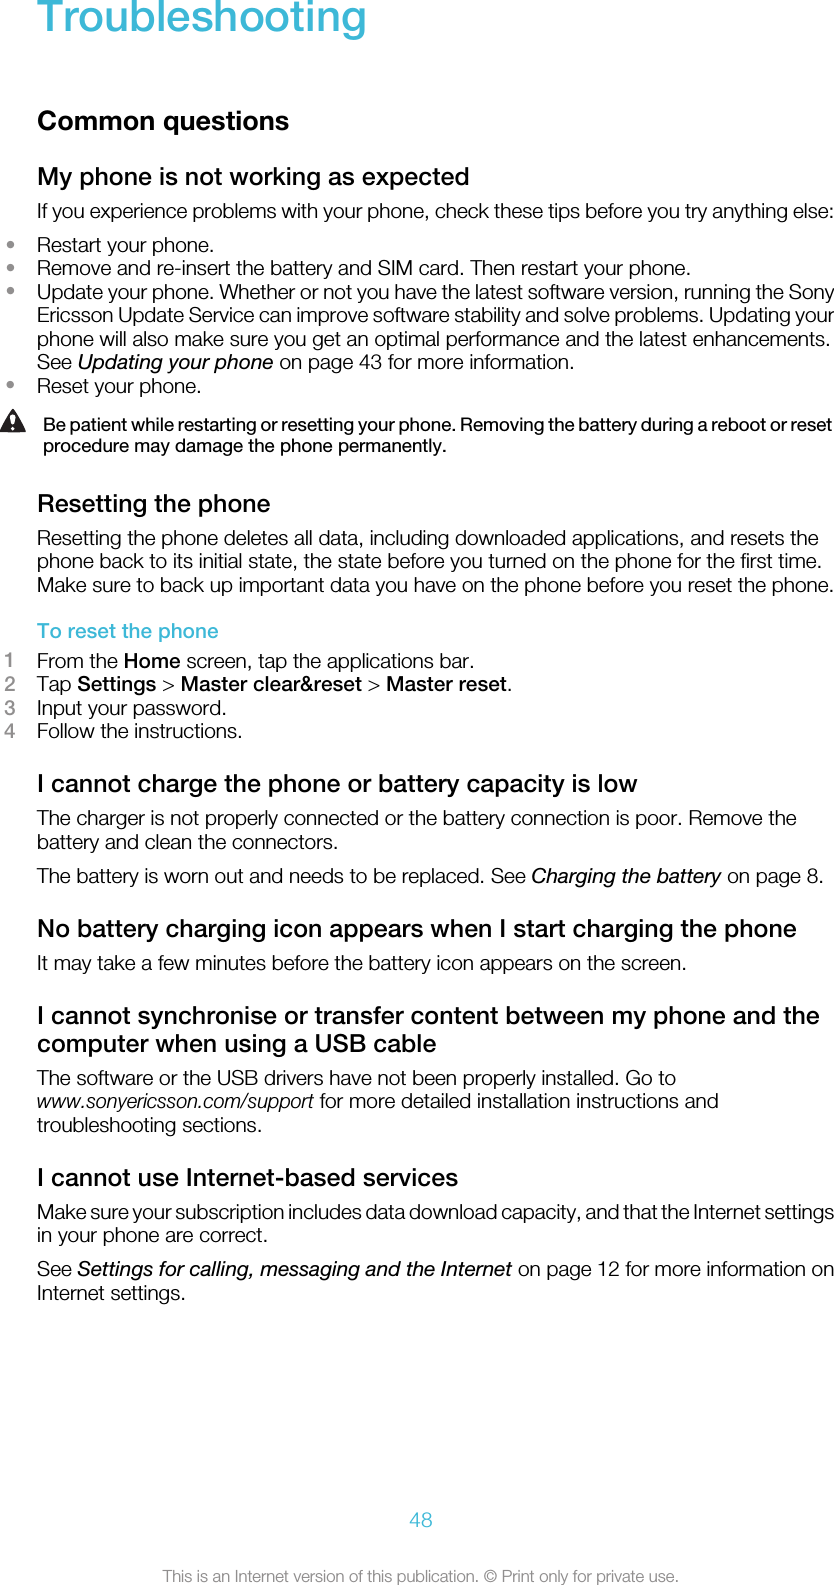 TroubleshootingCommon questionsMy phone is not working as expectedIf you experience problems with your phone, check these tips before you try anything else:•Restart your phone.•Remove and re-insert the battery and SIM card. Then restart your phone.•Update your phone. Whether or not you have the latest software version, running the SonyEricsson Update Service can improve software stability and solve problems. Updating yourphone will also make sure you get an optimal performance and the latest enhancements.See Updating your phone on page 43 for more information.•Reset your phone.Be patient while restarting or resetting your phone. Removing the battery during a reboot or resetprocedure may damage the phone permanently.Resetting the phoneResetting the phone deletes all data, including downloaded applications, and resets thephone back to its initial state, the state before you turned on the phone for the first time.Make sure to back up important data you have on the phone before you reset the phone.To reset the phone1From the Home screen, tap the applications bar.2Tap Settings &gt; Master clear&amp;reset &gt; Master reset.3Input your password.4Follow the instructions.I cannot charge the phone or battery capacity is lowThe charger is not properly connected or the battery connection is poor. Remove thebattery and clean the connectors.The battery is worn out and needs to be replaced. See Charging the battery on page 8.No battery charging icon appears when I start charging the phoneIt may take a few minutes before the battery icon appears on the screen.I cannot synchronise or transfer content between my phone and thecomputer when using a USB cableThe software or the USB drivers have not been properly installed. Go towww.sonyericsson.com/support for more detailed installation instructions andtroubleshooting sections.I cannot use Internet-based servicesMake sure your subscription includes data download capacity, and that the Internet settingsin your phone are correct.See Settings for calling, messaging and the Internet on page 12 for more information onInternet settings.48This is an Internet version of this publication. © Print only for private use.